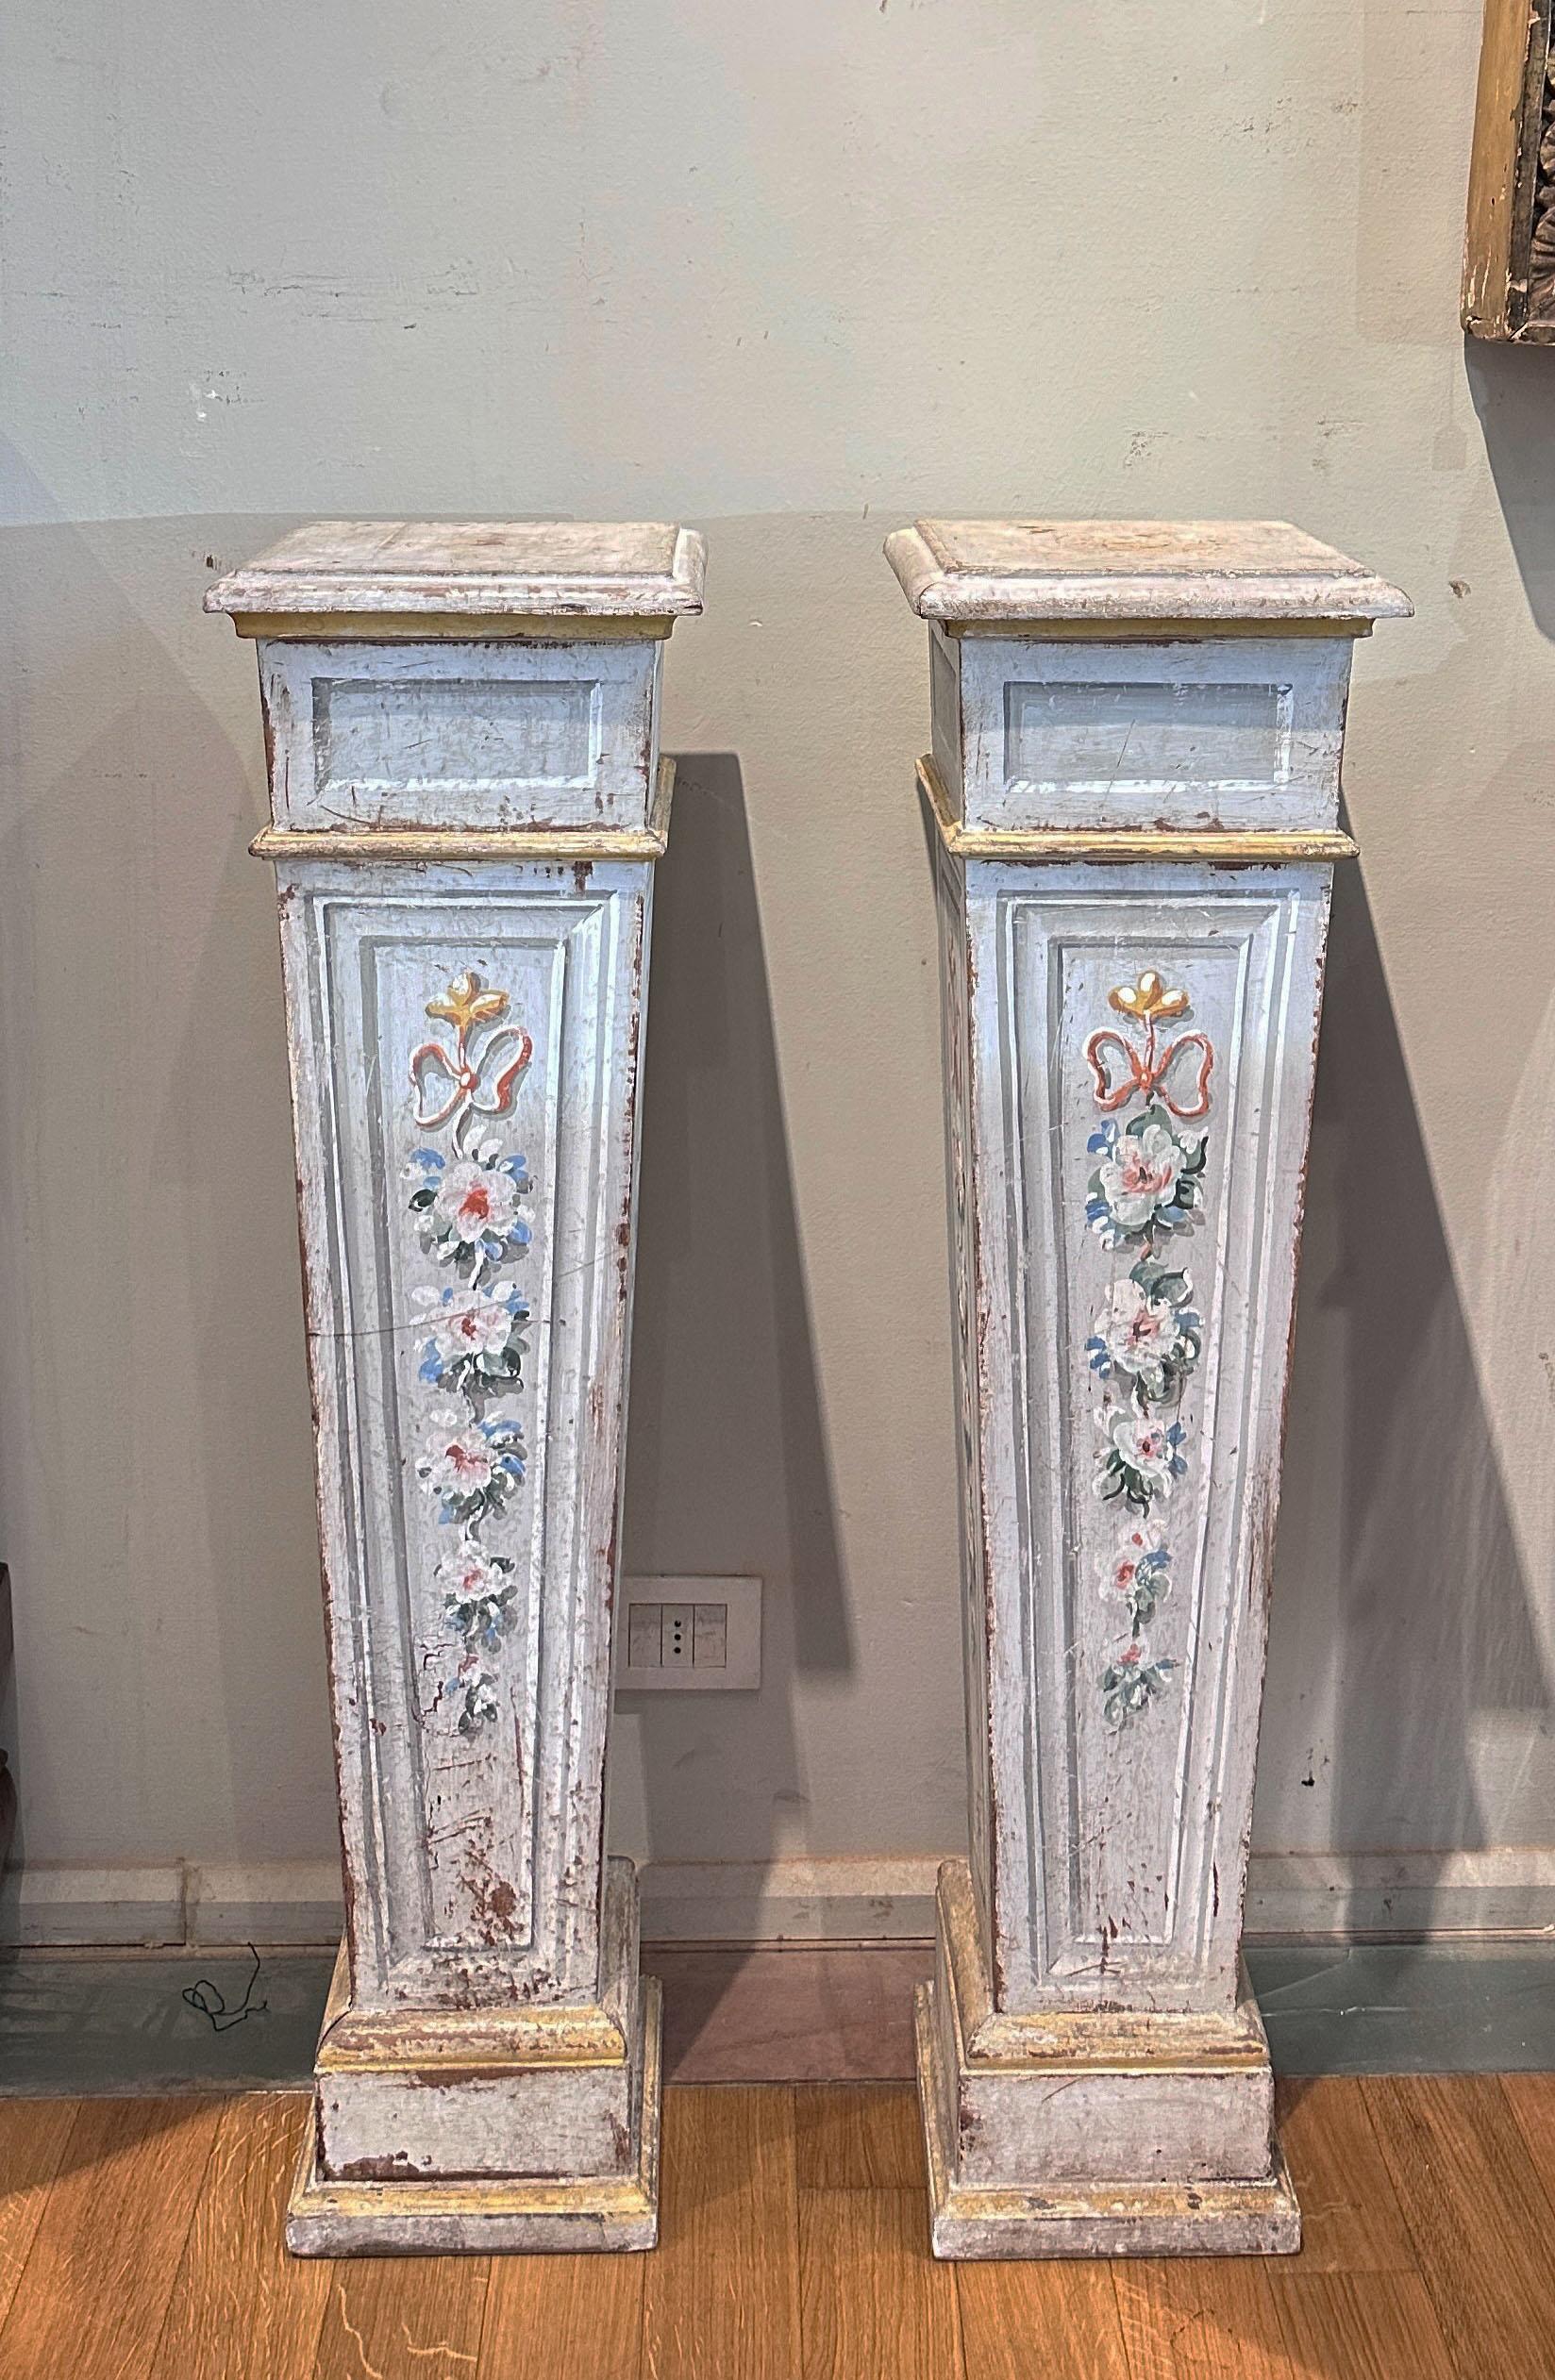 Pair of elegant columns made of carved and painted wood. Their shape is rectangular, with a slight taper toward the bottom, giving them a graceful and harmonious appearance. The decoration of the columns is symmetrical and reflects the aesthetic